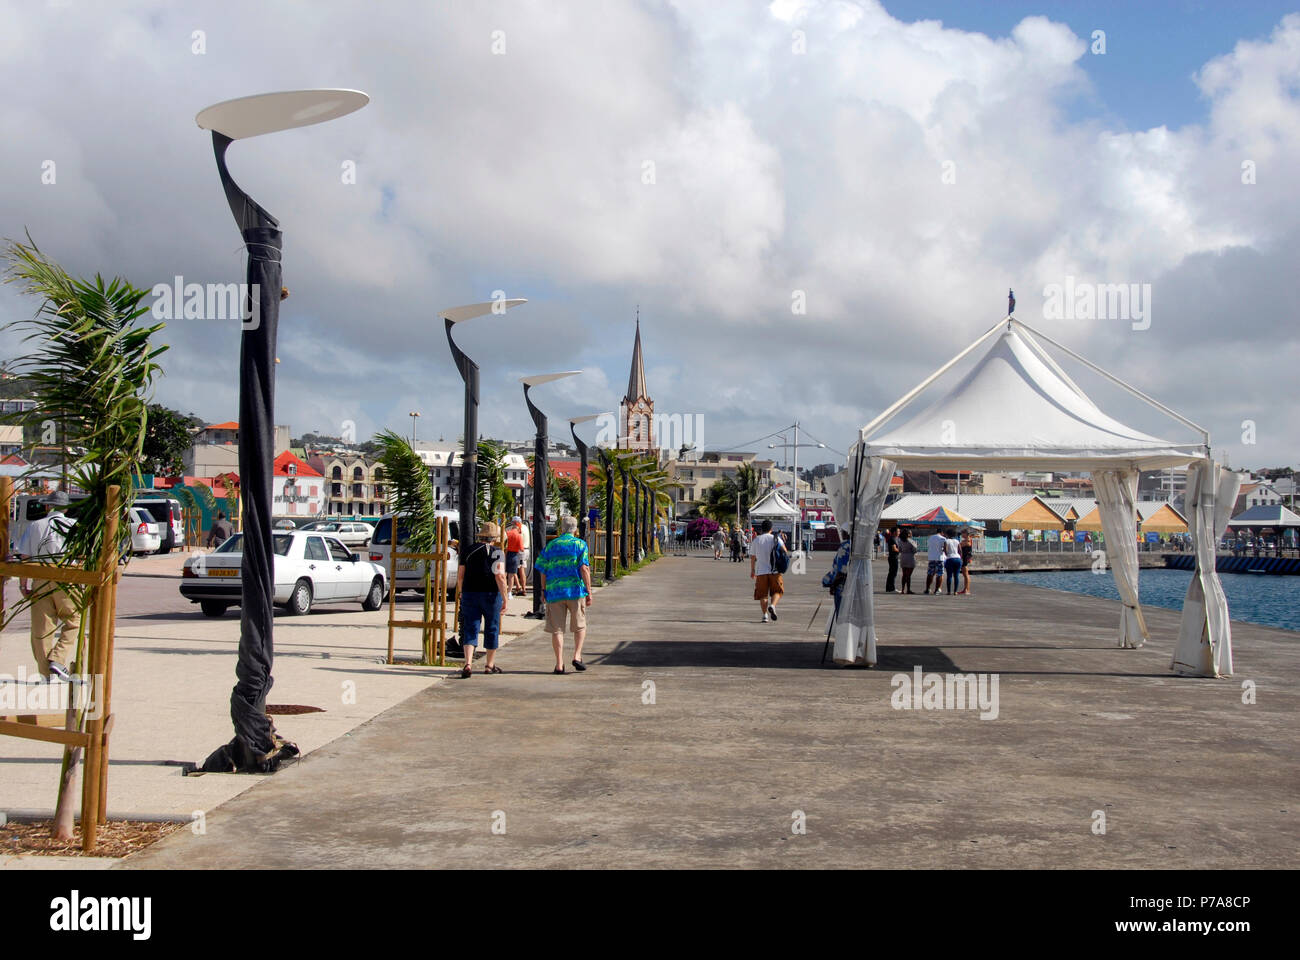 Harbor-side market area, Fort de France, Martinique, Caribbean, closed today as it is Sunday Stock Photo